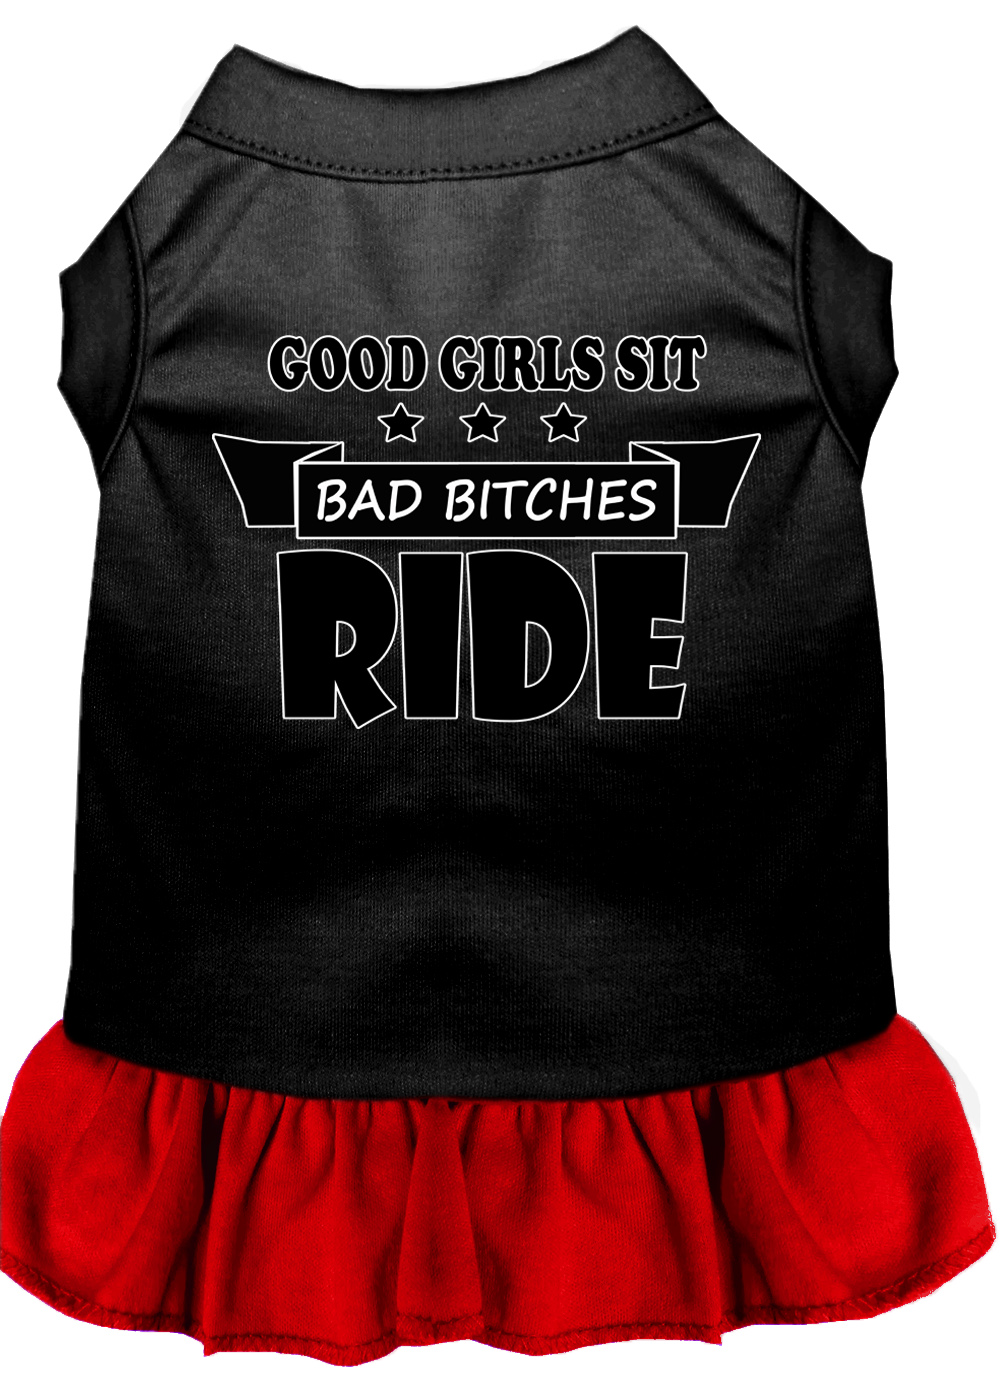 Bitches Ride Screen Print Dog Dress Black with Red Lg